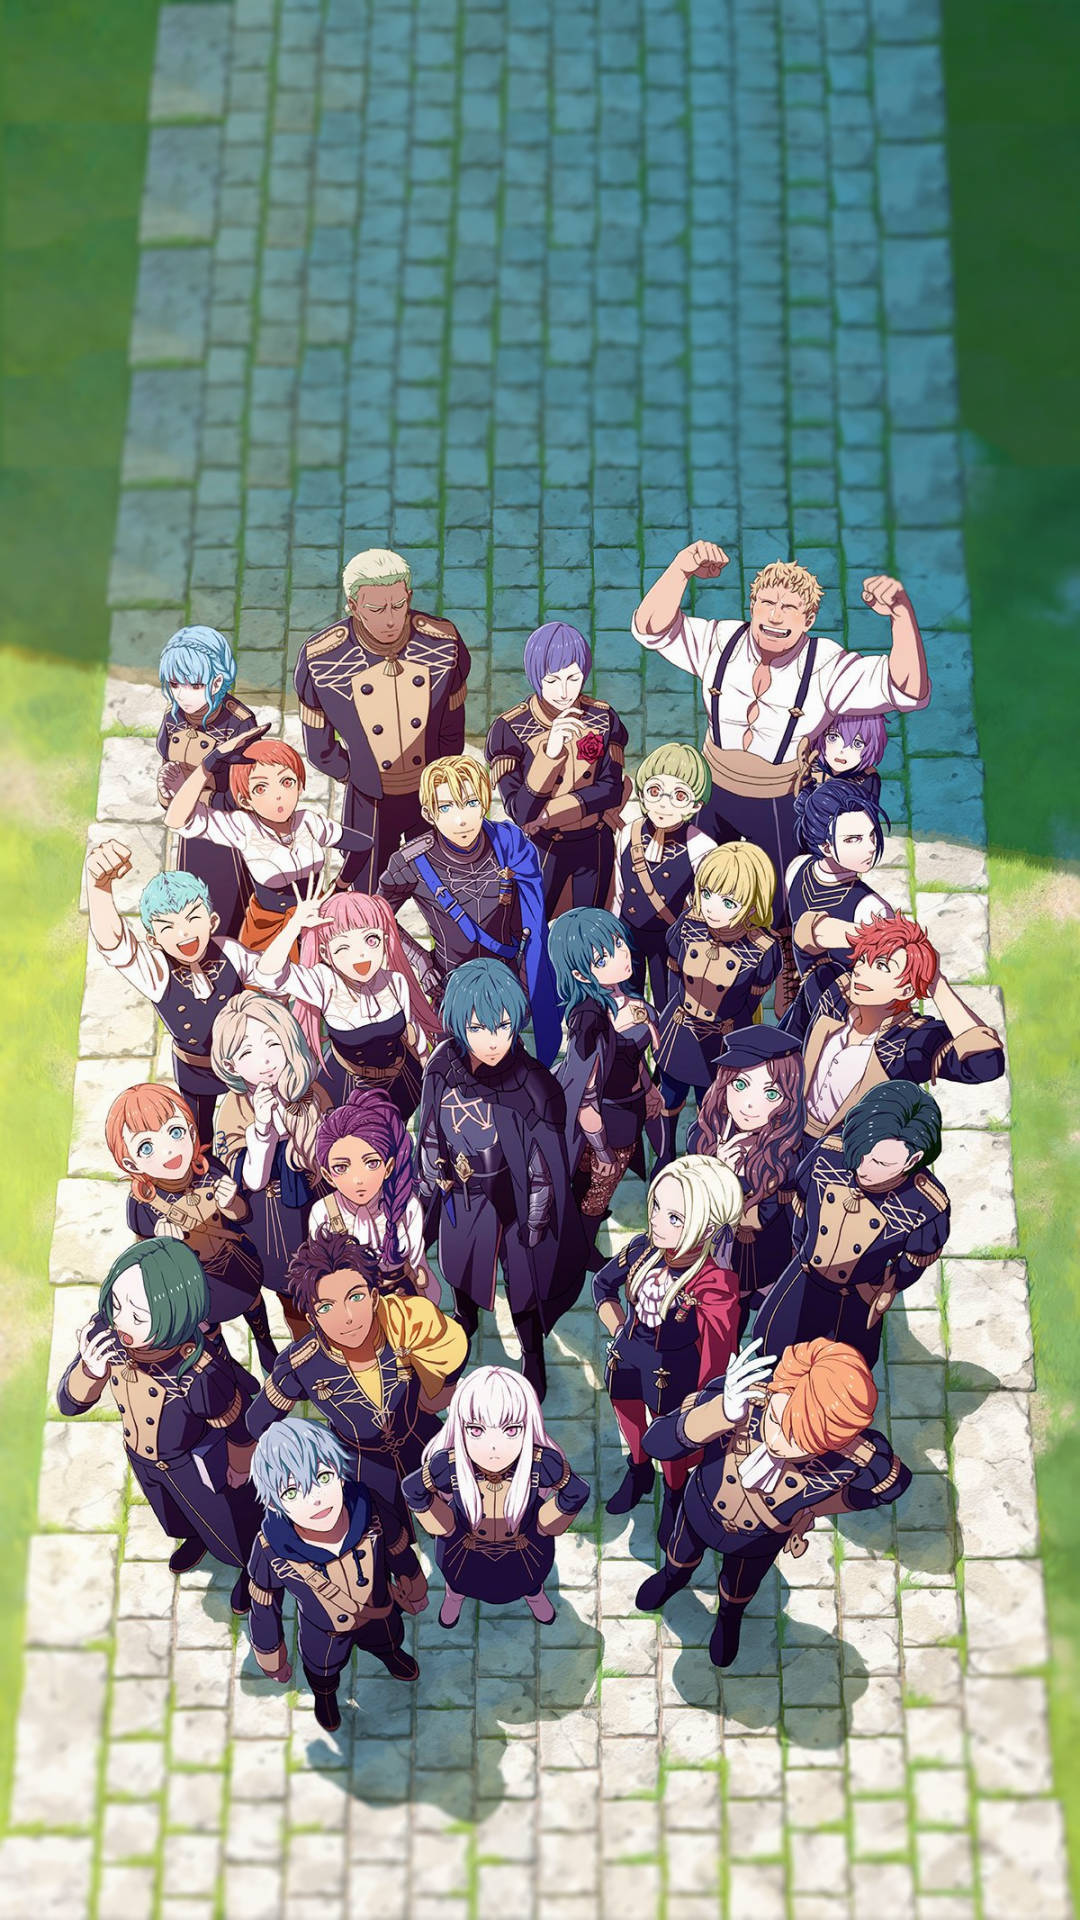 Recruit and command an elite group of warriors in Fire Emblem: Three Houses Wallpaper